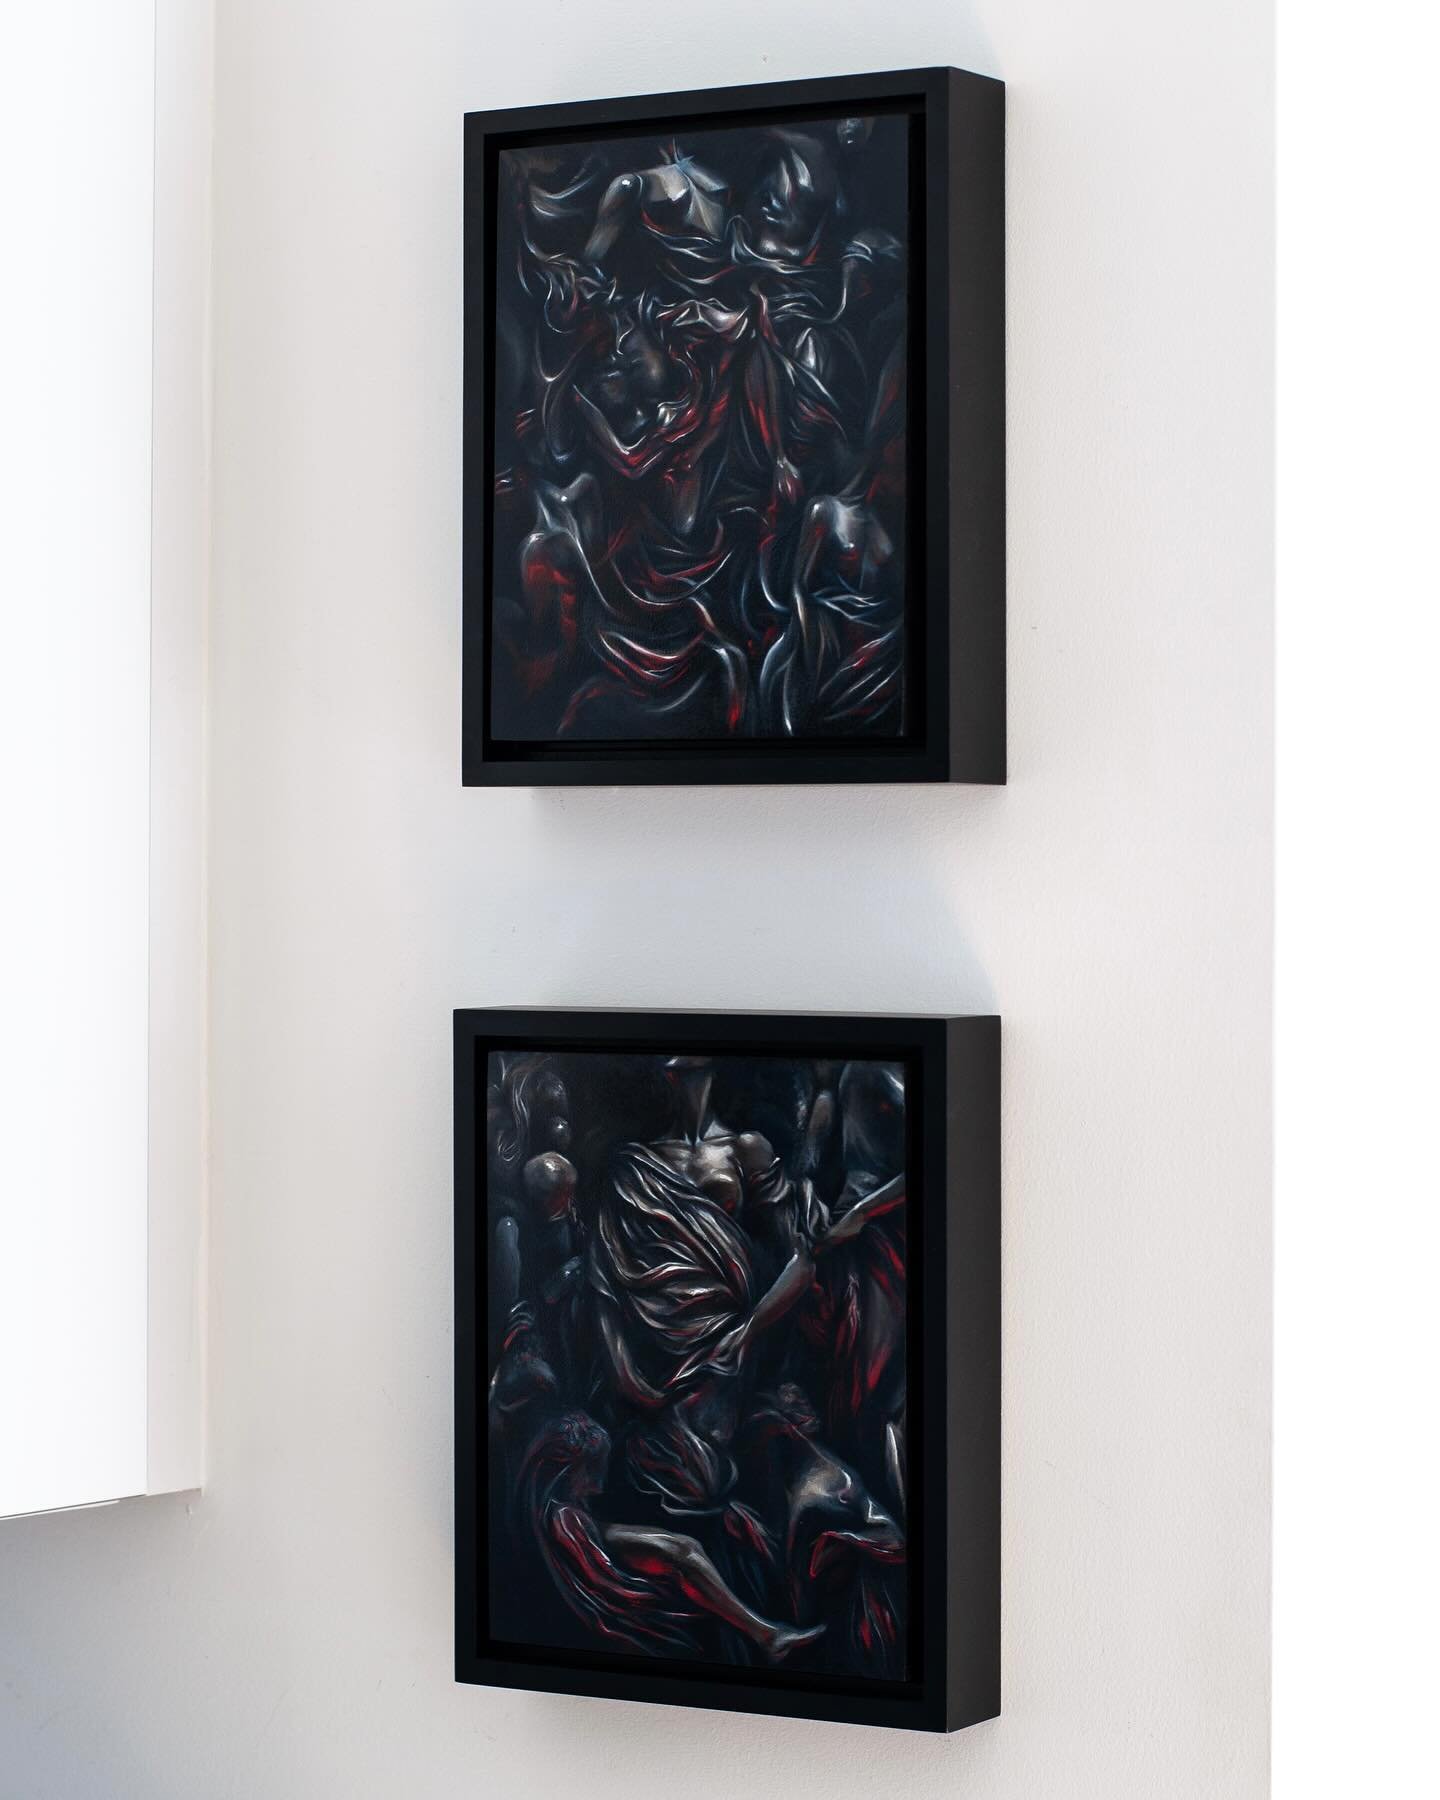 My dynamic duo! Zenith&rsquo;s Peak (top) and In Her Orbit (bottom), proudly adorning their new home side by side. 

These two paintings are sisters in spirit, each capturing a distinct moment in time. My intention was to create a before-and-after na